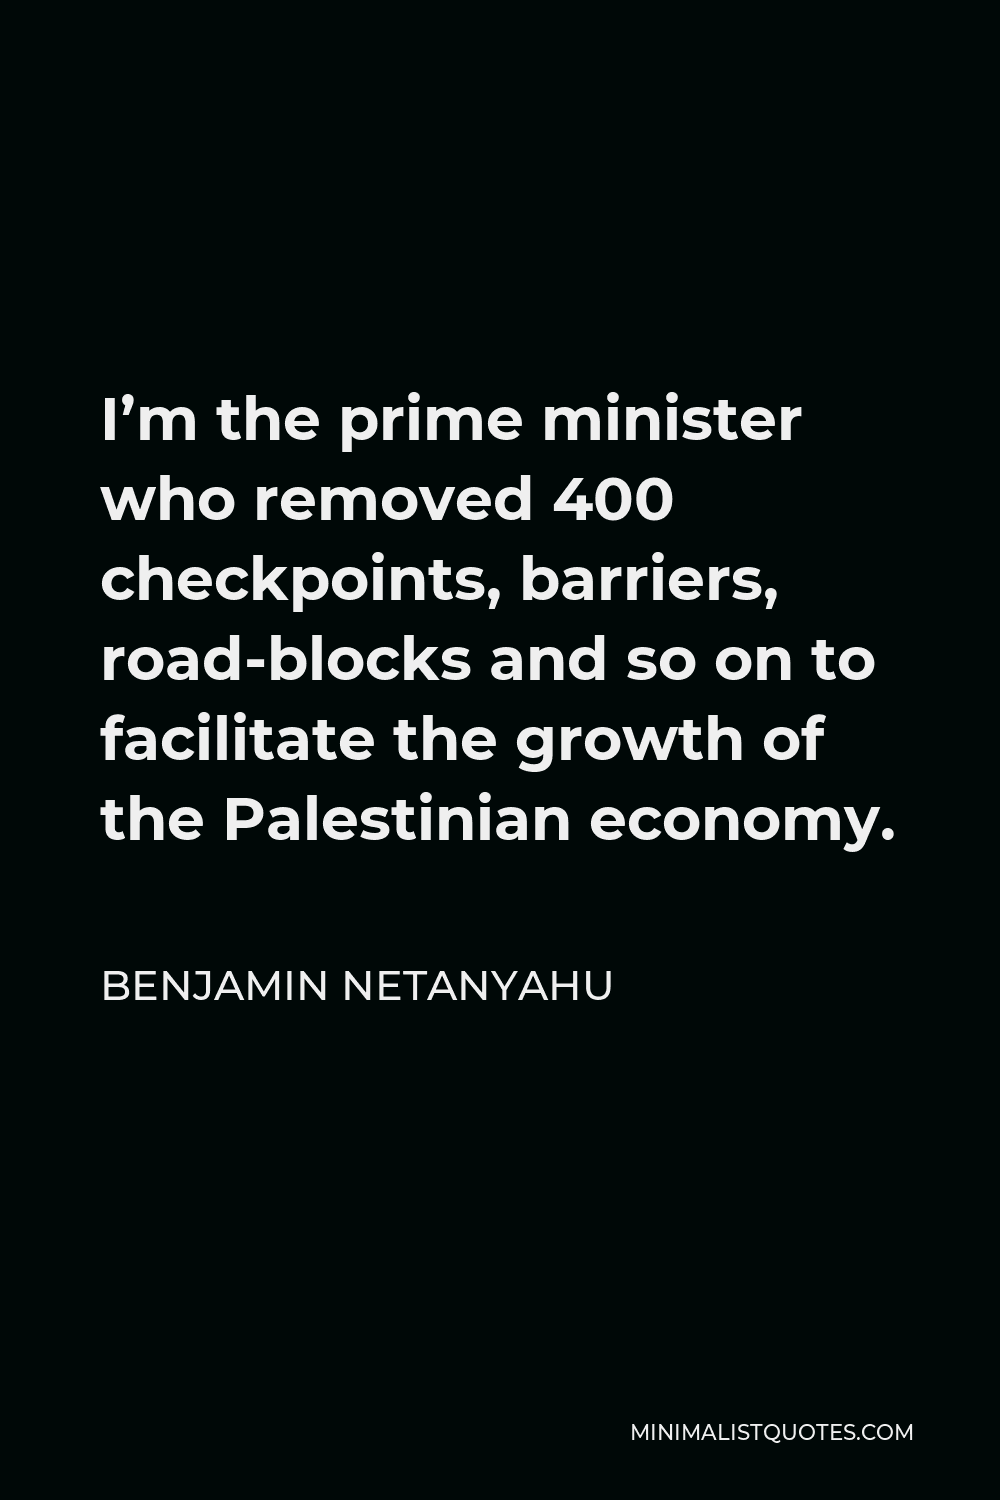 Benjamin Netanyahu Quote - I’m the prime minister who removed 400 checkpoints, barriers, road-blocks and so on to facilitate the growth of the Palestinian economy.